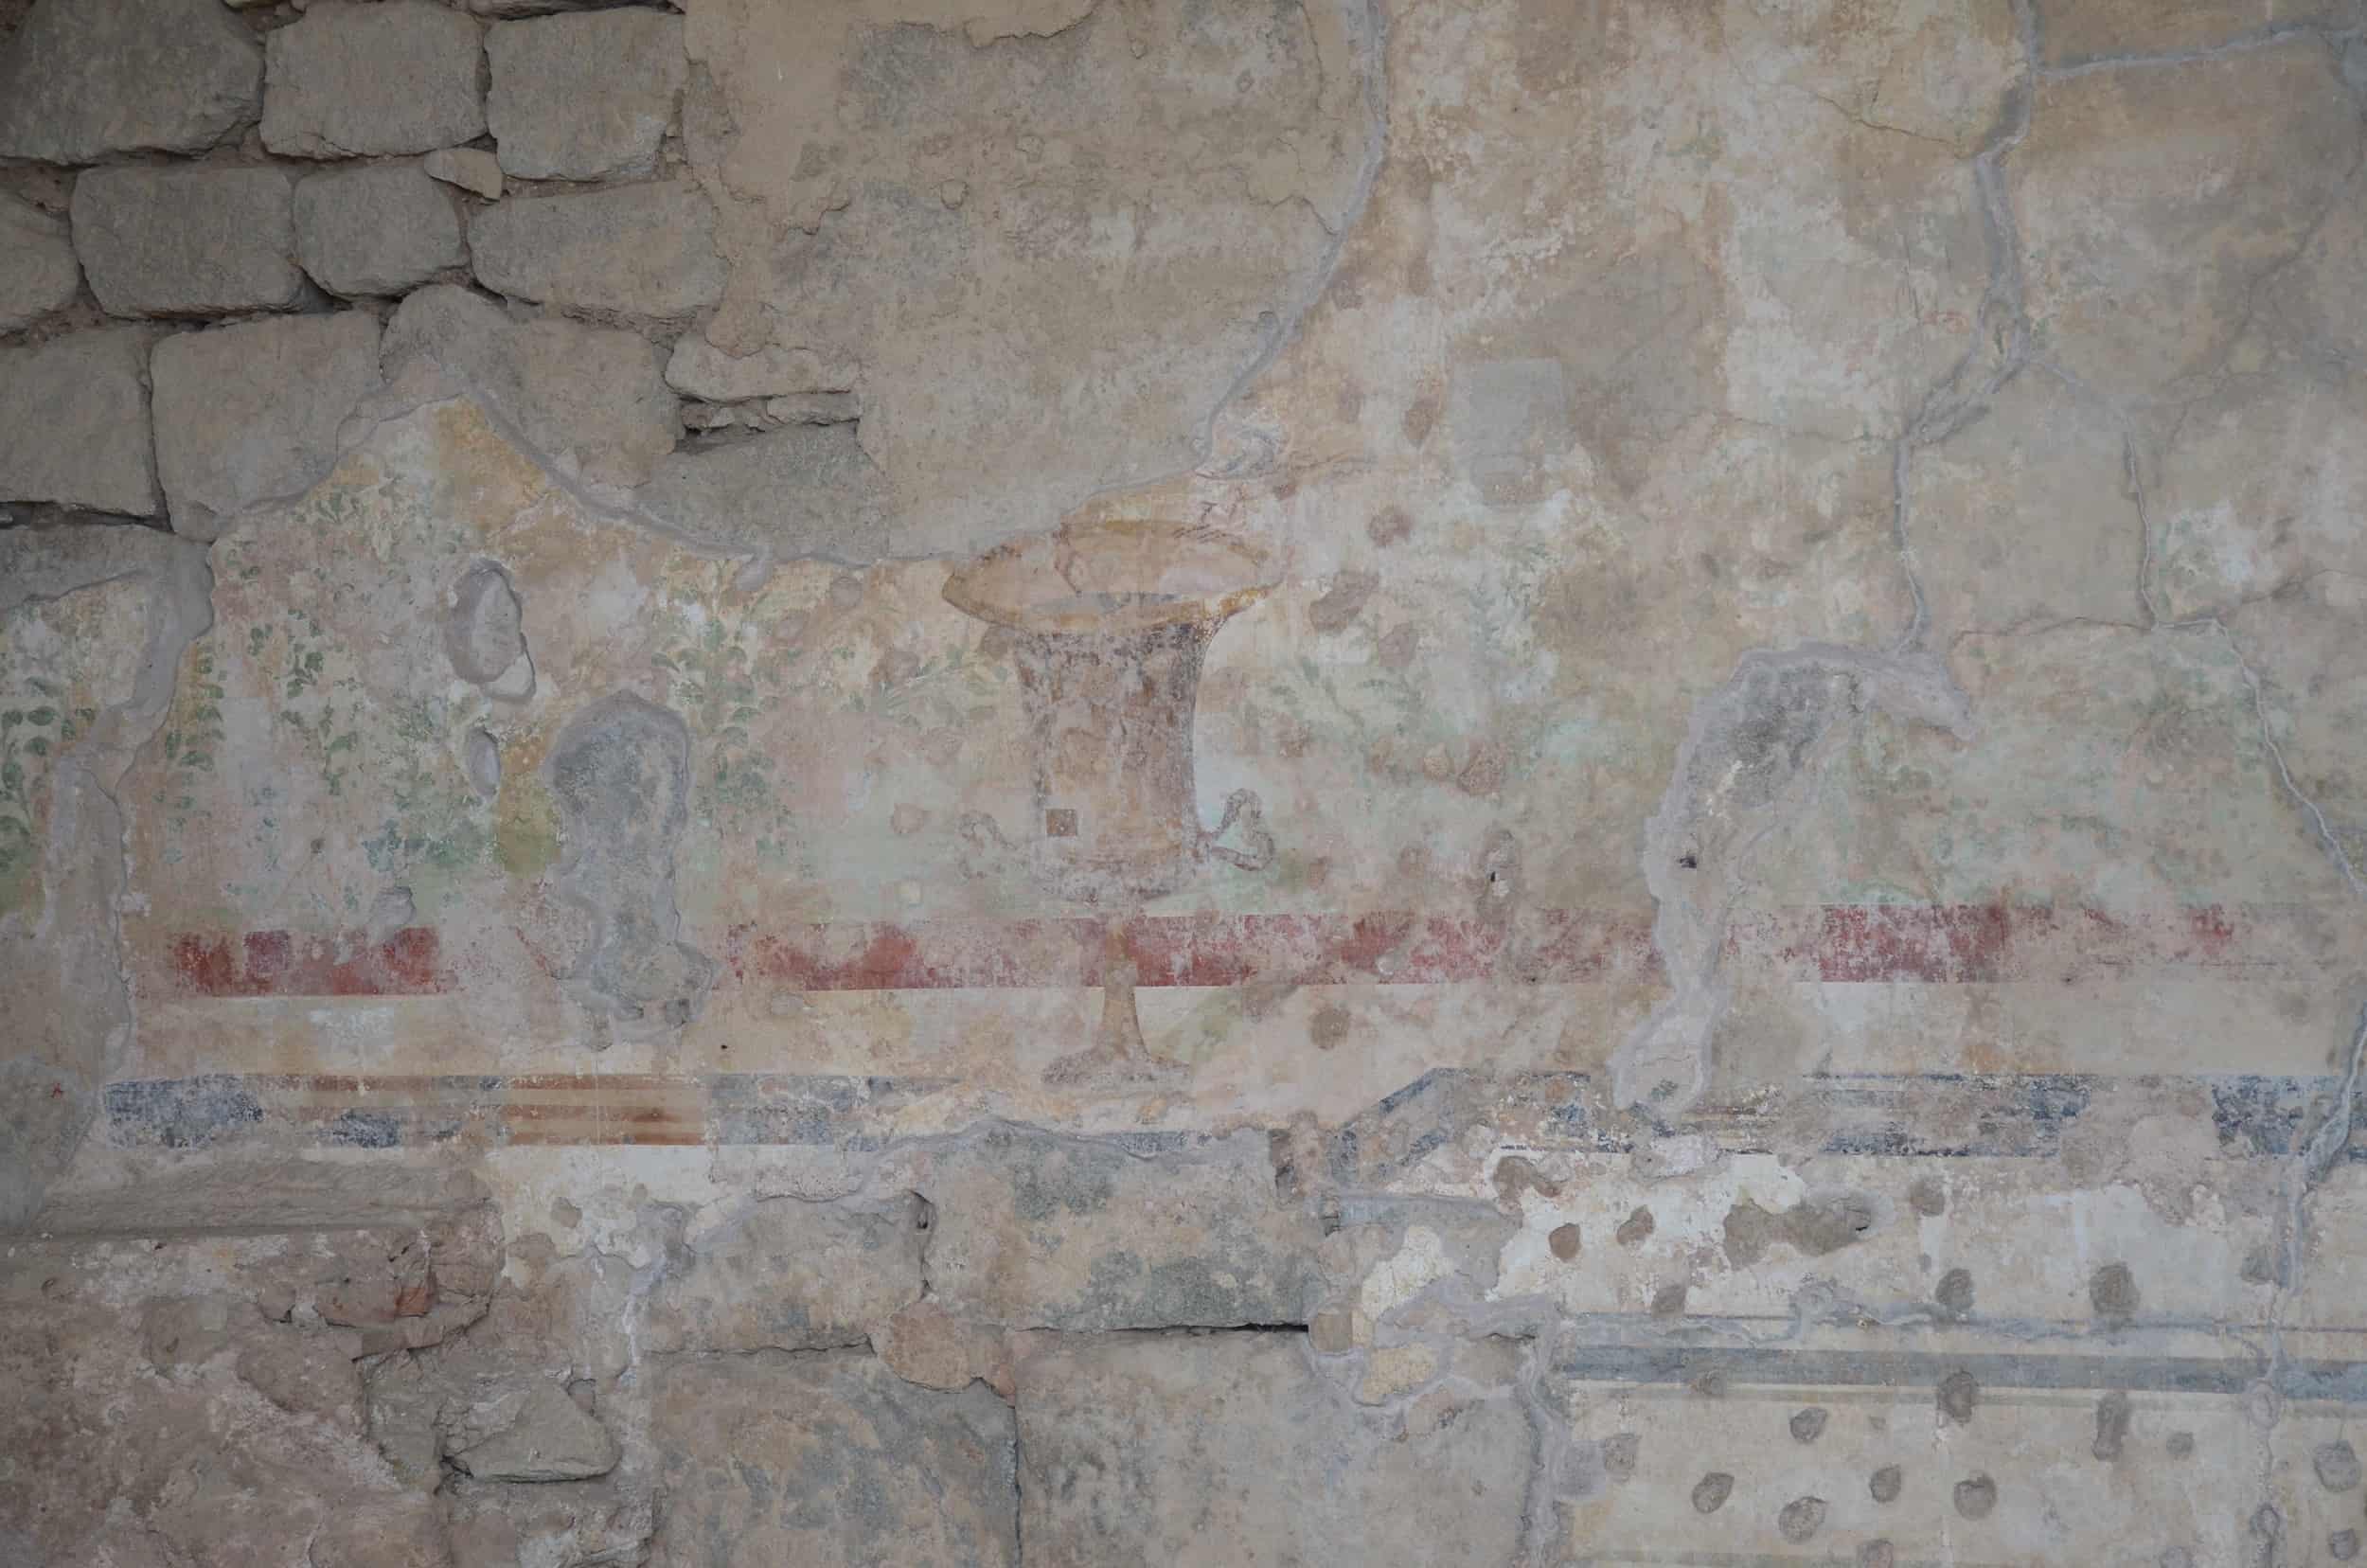 Frescoes at the House of Attalus